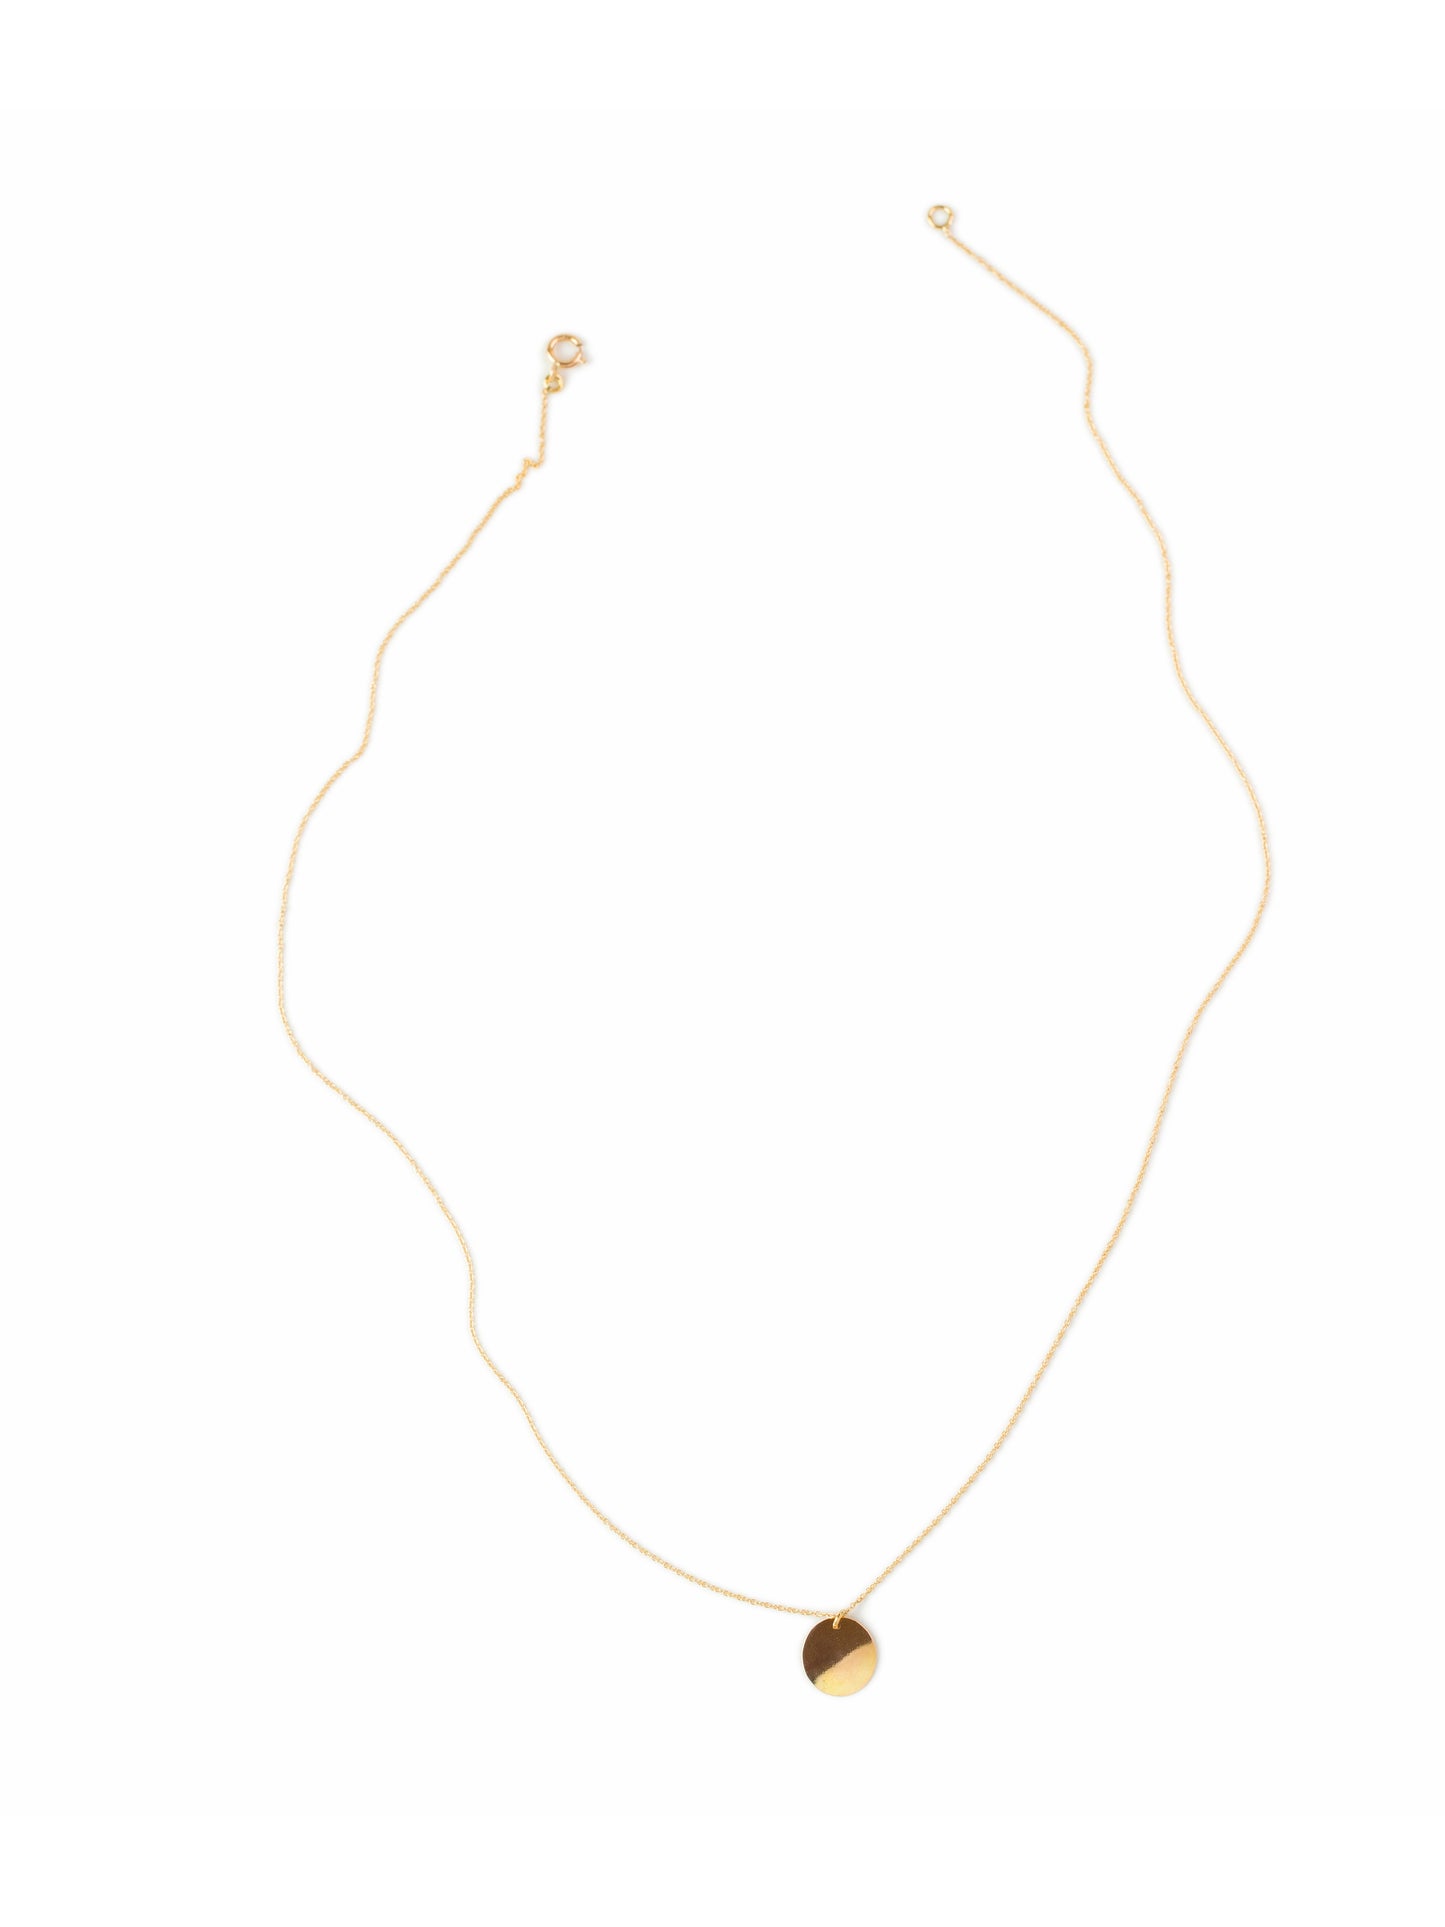 OVAL GOLD CHAIN NECKLACE